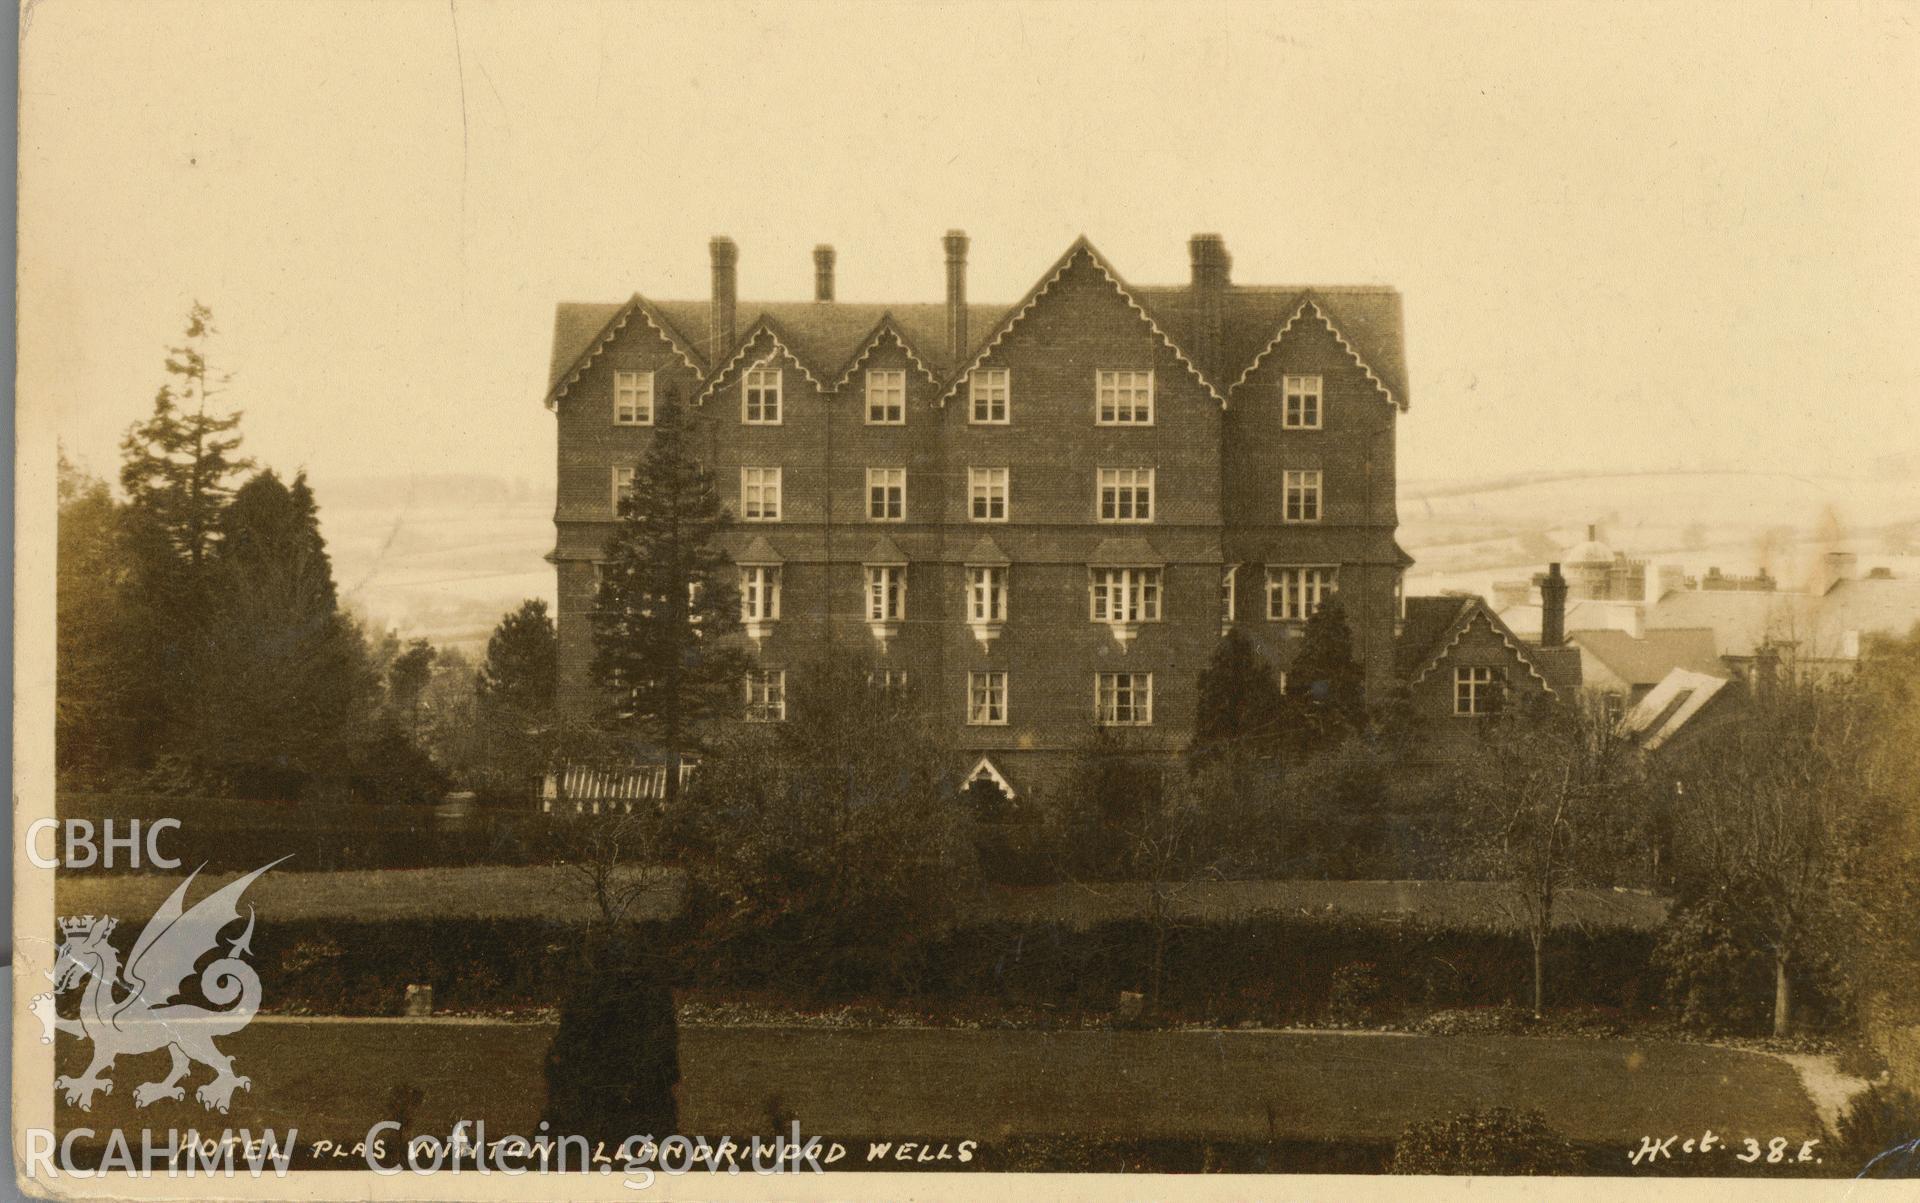 Digitised postcard image of Hotel Plas Winton, Llandrindod Wells. Produced by Parks and Gardens Data Services, from an original item in the Peter Davis Collection at Parks and Gardens UK. We hold only web-resolution images of this collection, suitable for viewing on screen and for research purposes only. We do not hold the original images, or publication quality scans.